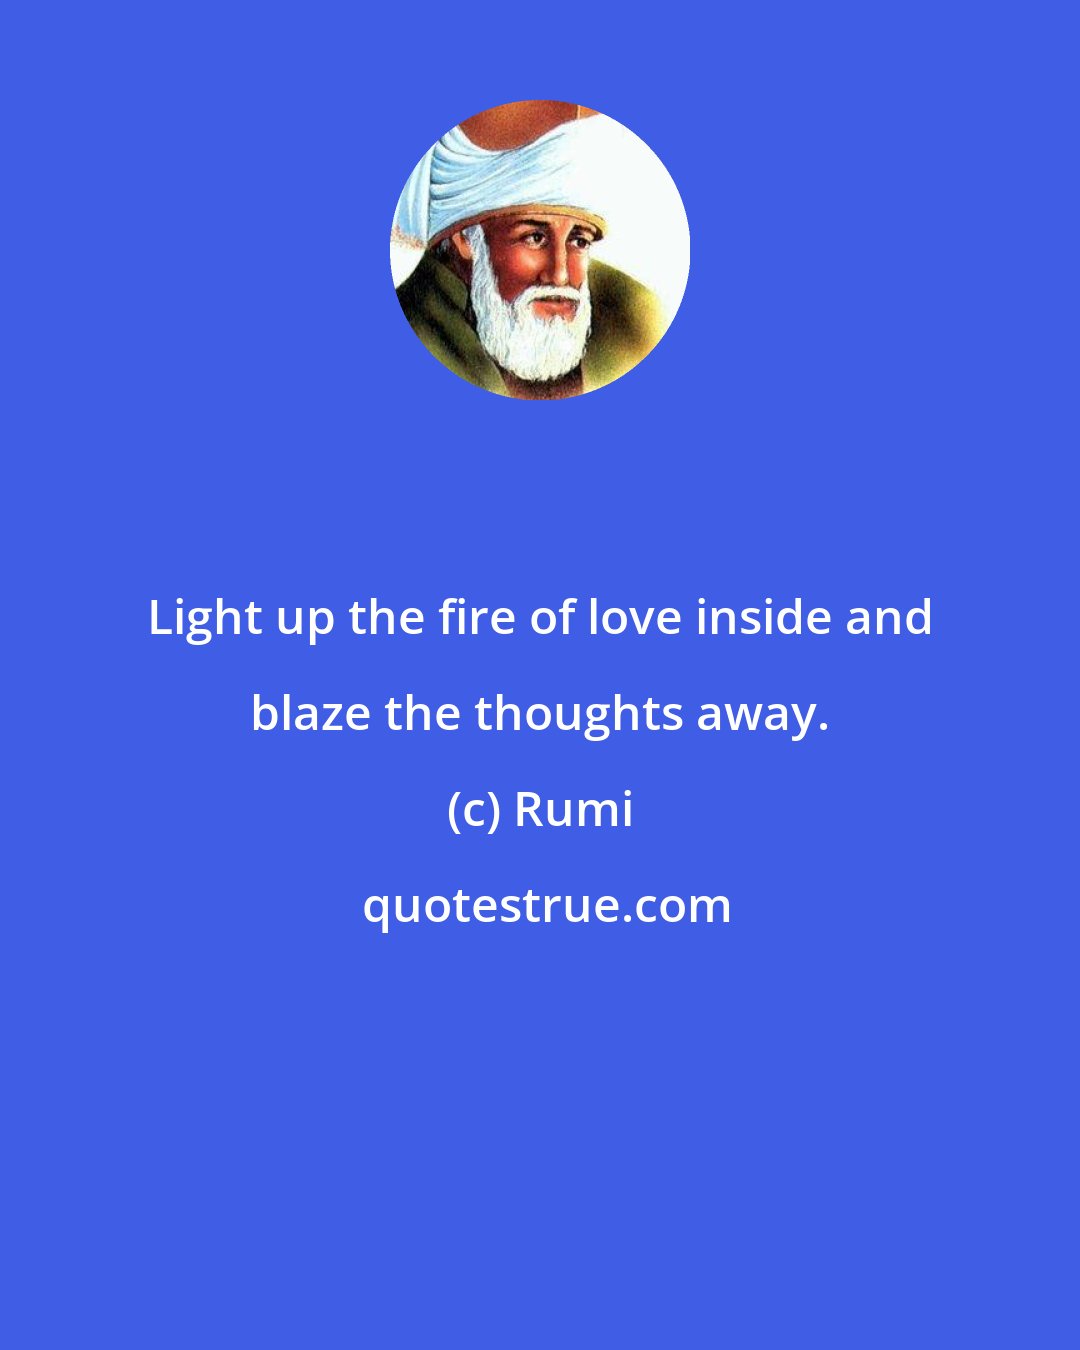 Rumi: Light up the fire of love inside and blaze the thoughts away.